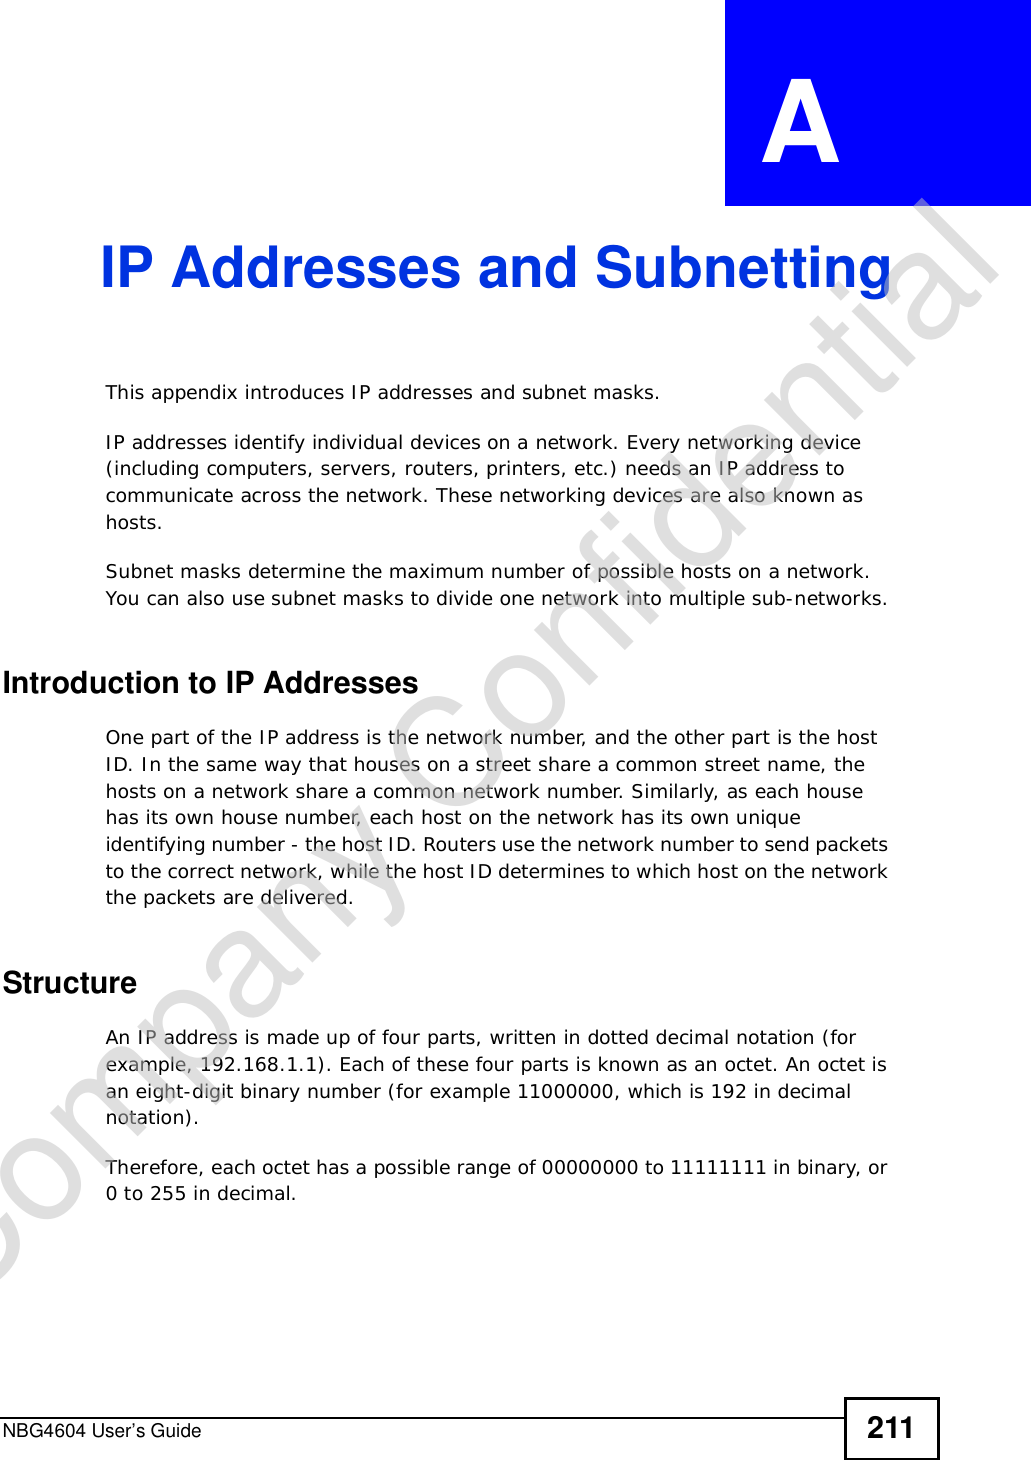 NBG4604 User’s Guide 211APPENDIX  A IP Addresses and SubnettingThis appendix introduces IP addresses and subnet masks. IP addresses identify individual devices on a network. Every networking device (including computers, servers, routers, printers, etc.) needs an IP address to communicate across the network. These networking devices are also known as hosts.Subnet masks determine the maximum number of possible hosts on a network. You can also use subnet masks to divide one network into multiple sub-networks.Introduction to IP AddressesOne part of the IP address is the network number, and the other part is the host ID. In the same way that houses on a street share a common street name, the hosts on a network share a common network number. Similarly, as each house has its own house number, each host on the network has its own unique identifying number - the host ID. Routers use the network number to send packets to the correct network, while the host ID determines to which host on the network the packets are delivered.StructureAn IP address is made up of four parts, written in dotted decimal notation (for example, 192.168.1.1). Each of these four parts is known as an octet. An octet is an eight-digit binary number (for example 11000000, which is 192 in decimal notation). Therefore, each octet has a possible range of 00000000 to 11111111 in binary, or 0 to 255 in decimal.Company Confidential